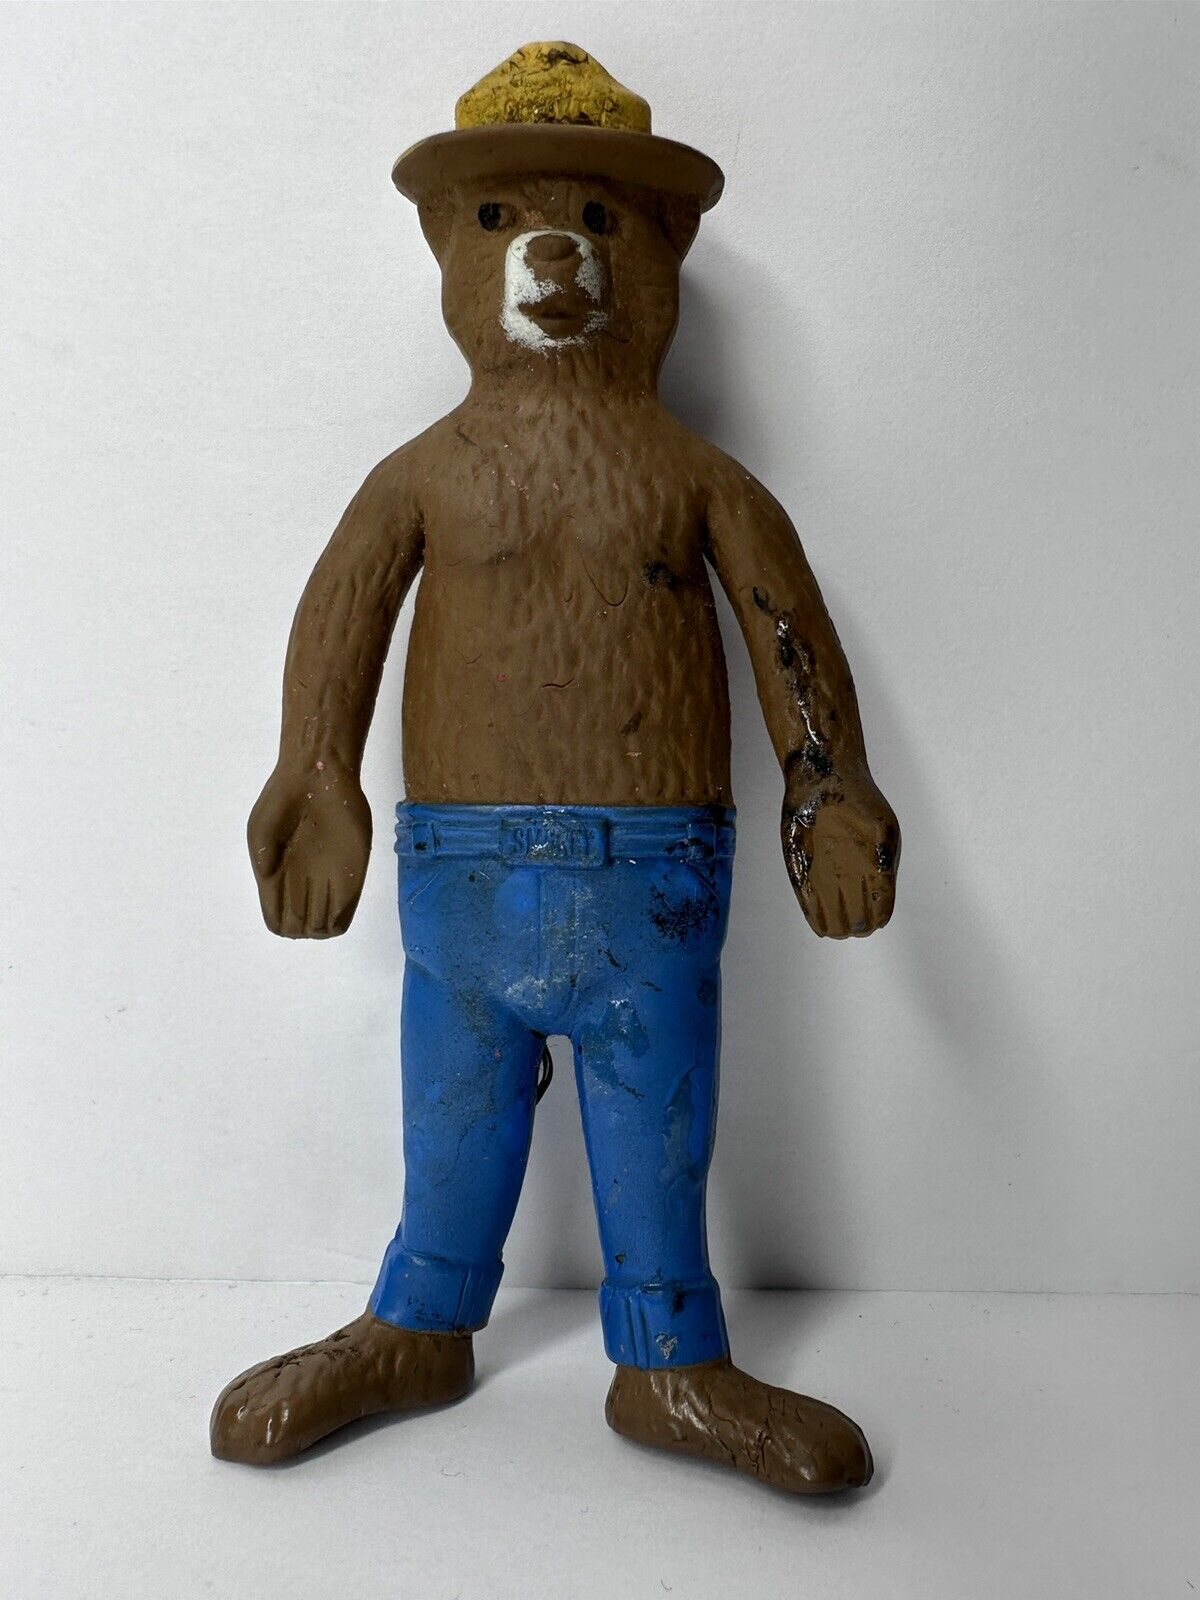 Authentic 1967 Vintage Smokey Bear Bendable Toy Doll - Rare Collectible 5.5" Figure - TreasuTiques